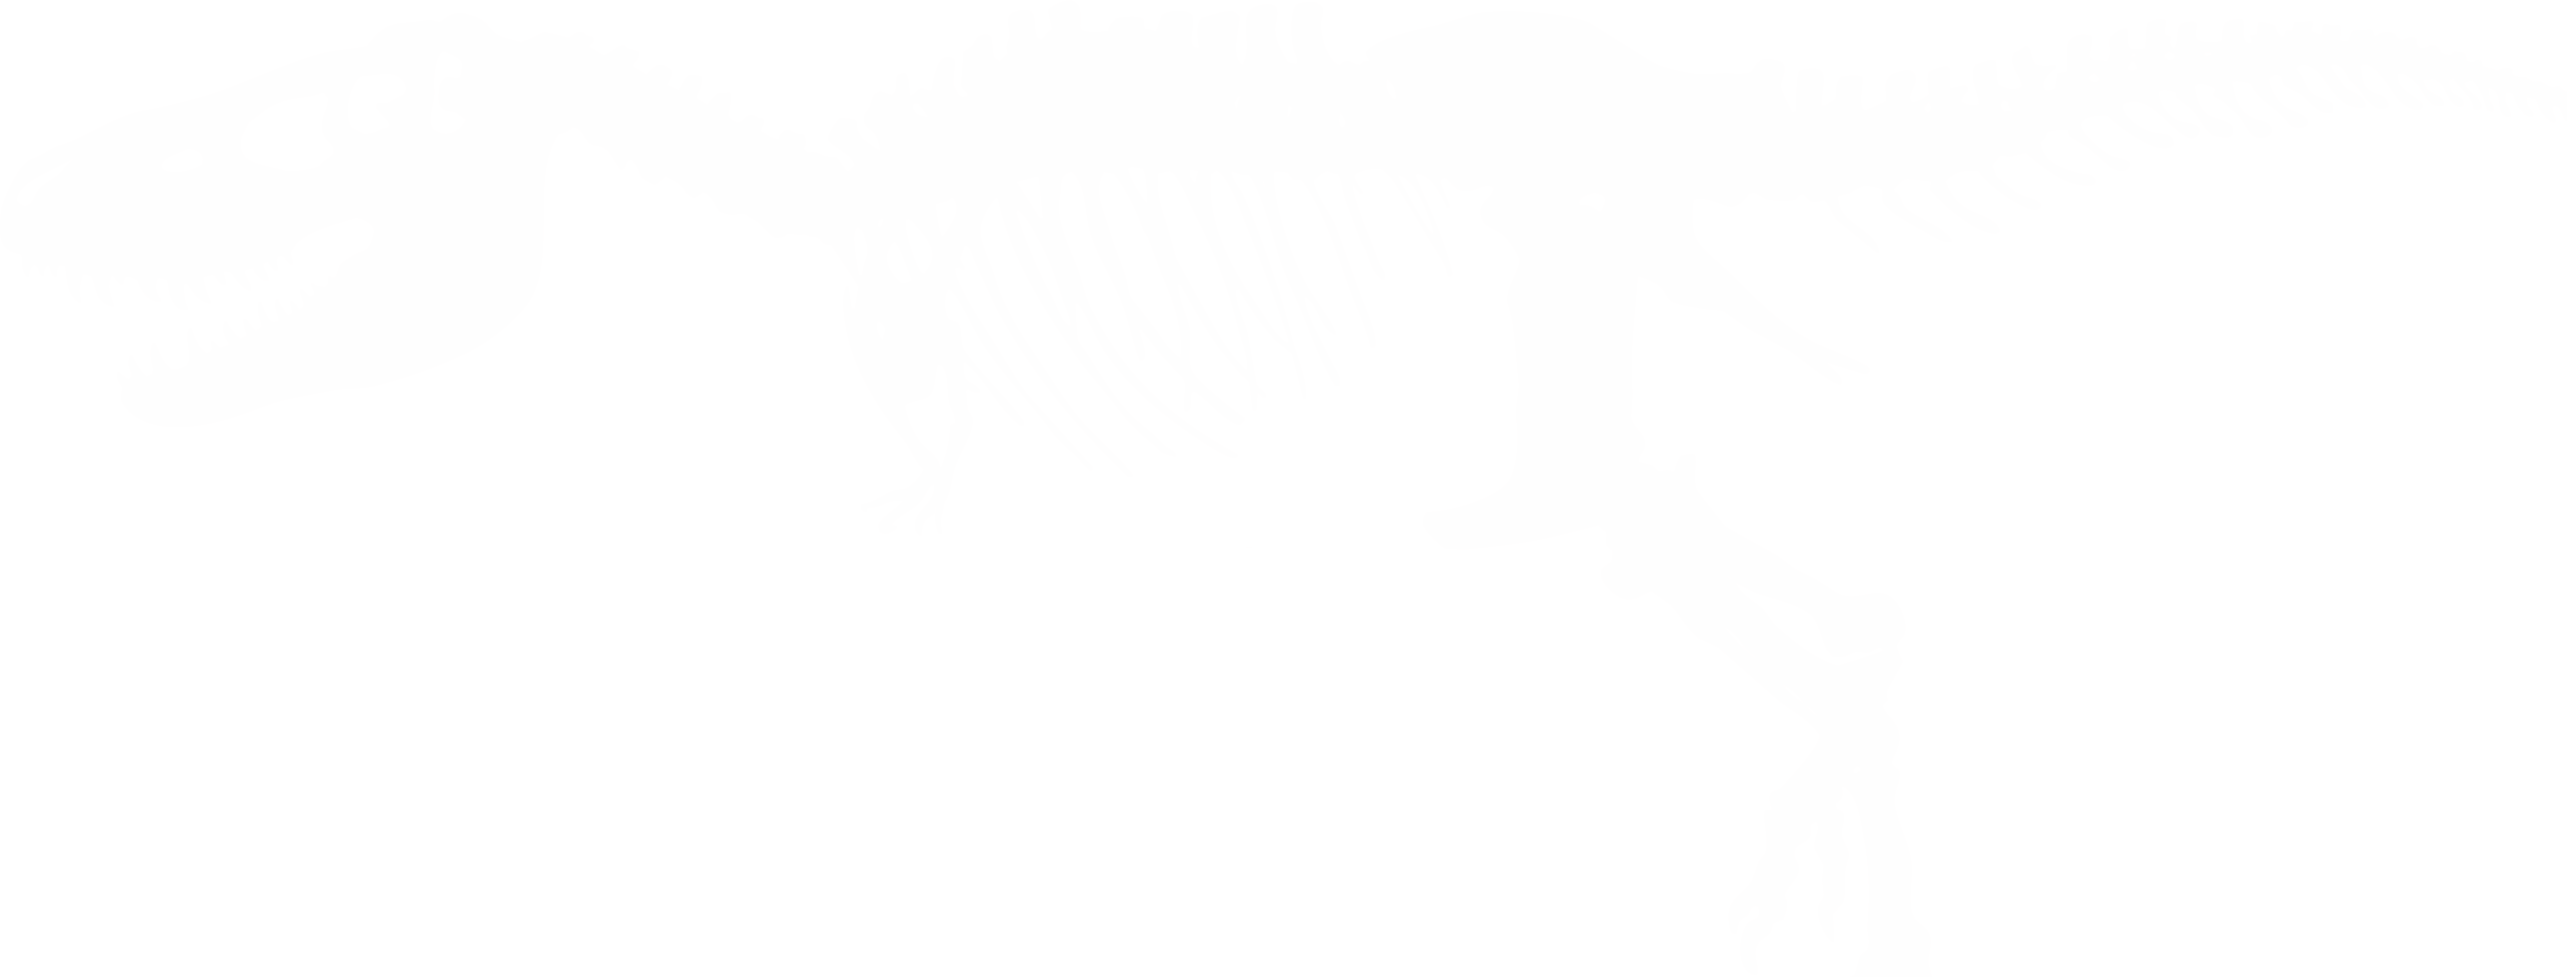 Silhouette of a T-Rex skeleton.